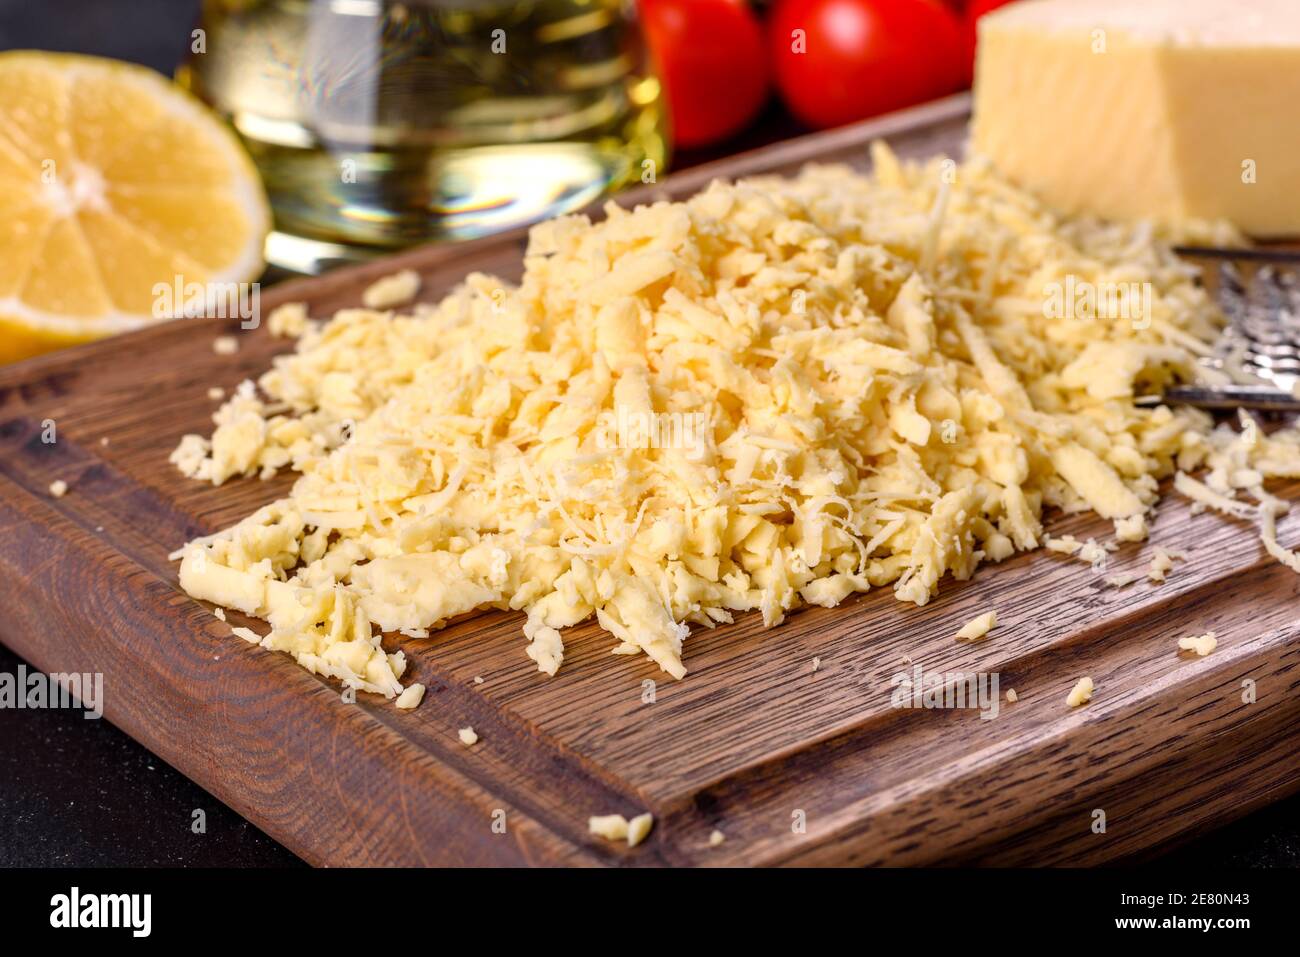 https://c8.alamy.com/comp/2E80N43/fresh-hard-cheese-grated-on-a-large-grater-on-a-wooden-cutting-board-on-a-dark-concrete-background-2E80N43.jpg